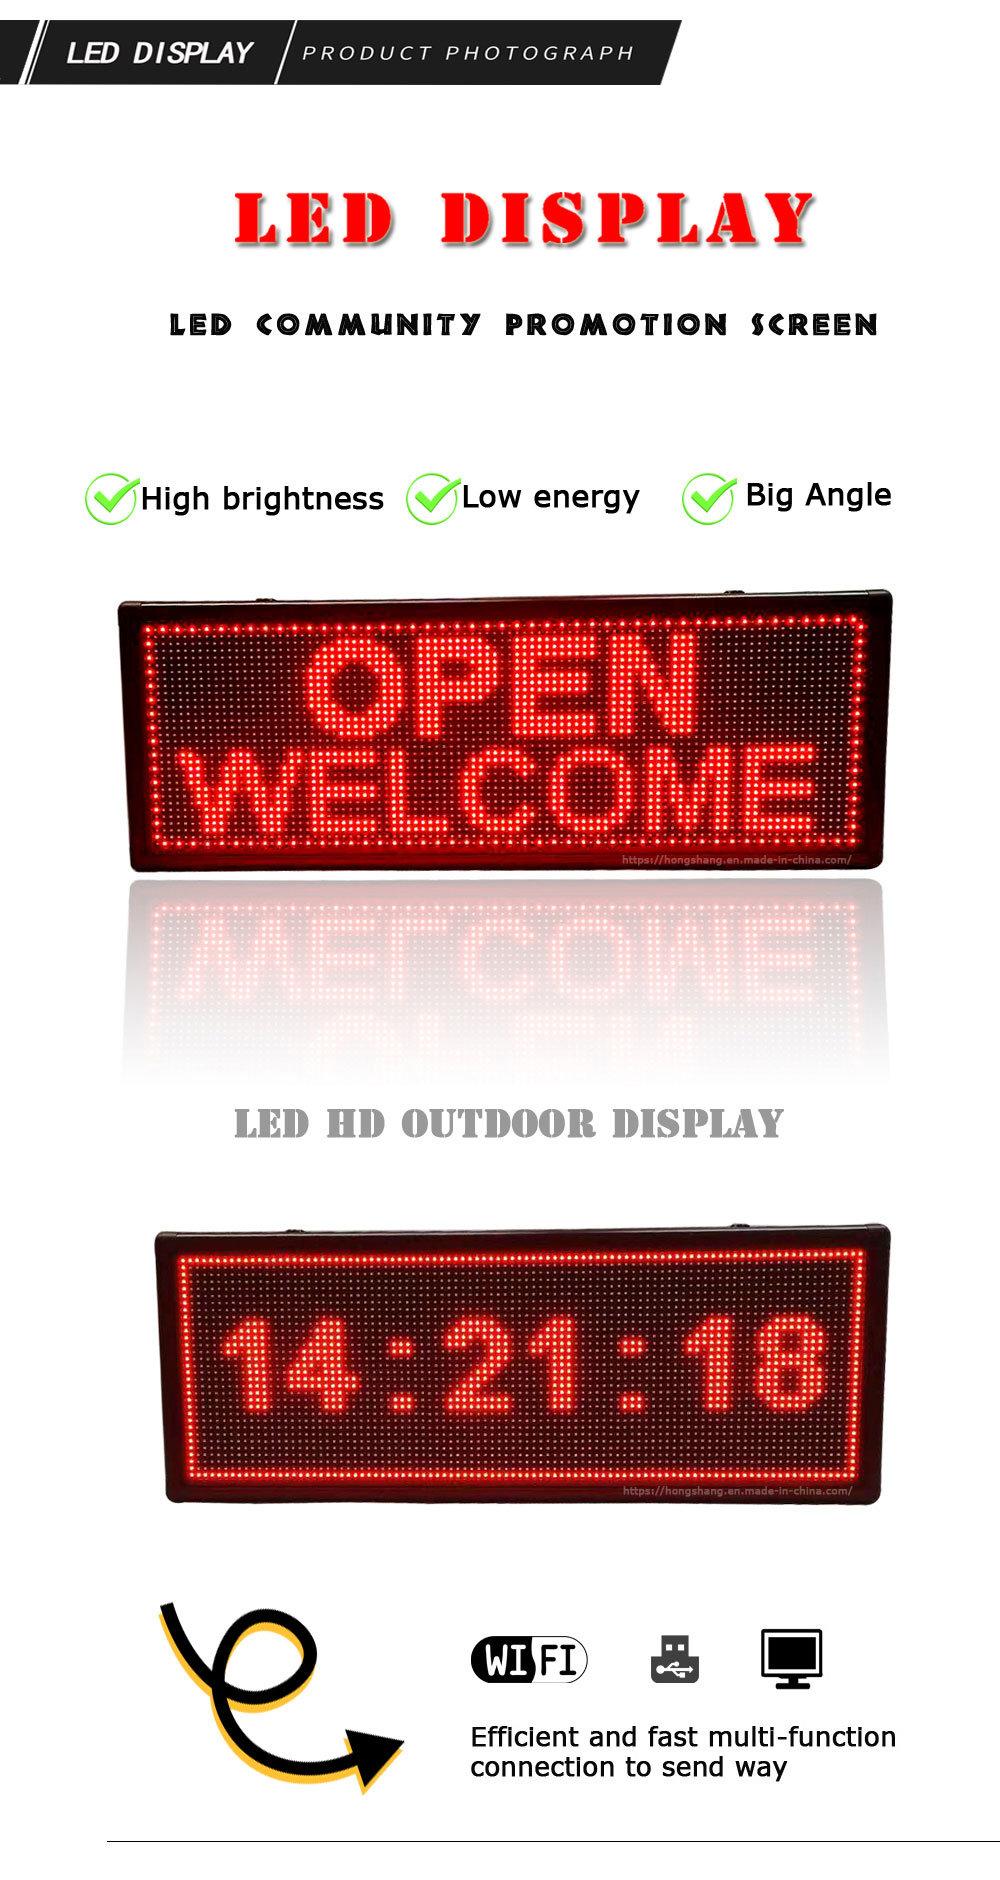 Semi-Outdoor Mounted LED Displays Are Suitable for Commercial Advertising